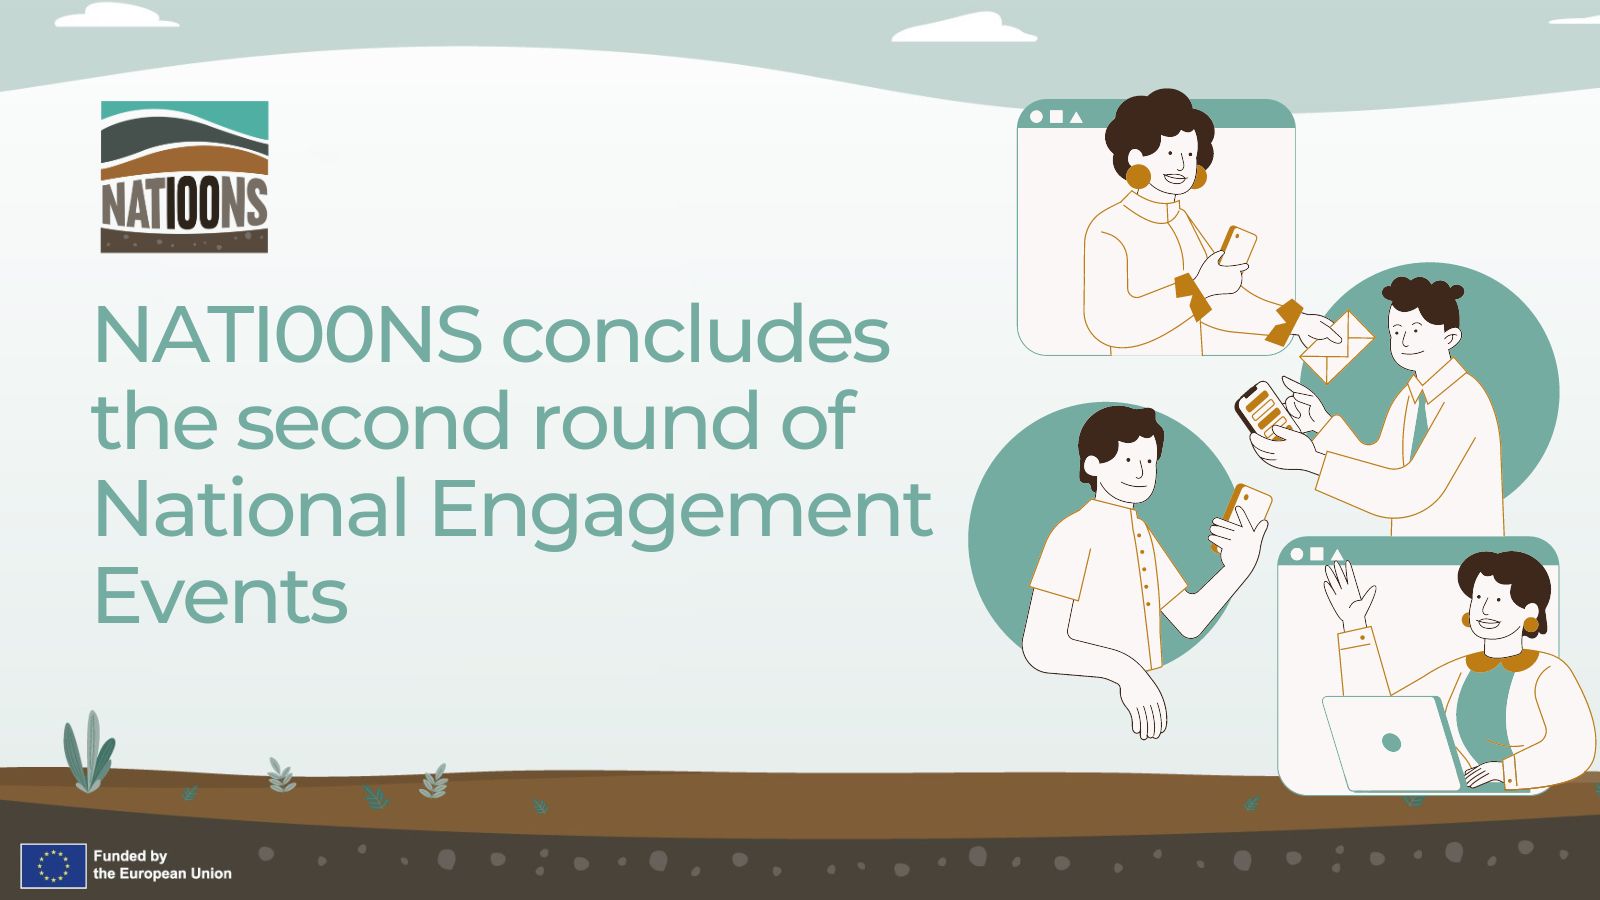 Second round of NATI00NS National Engagement Events